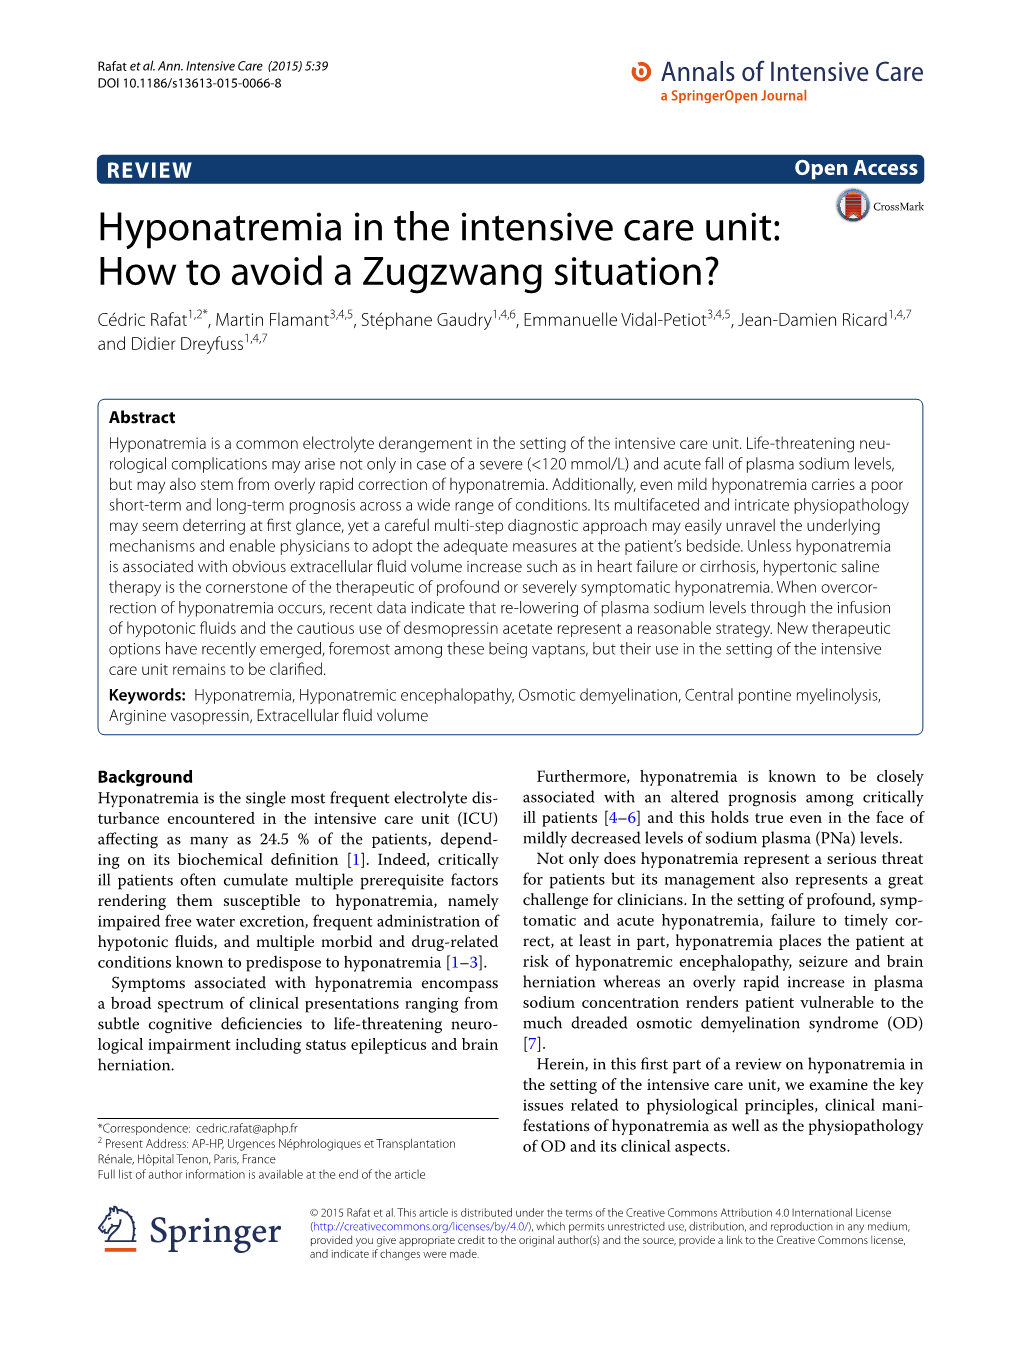 Hyponatremia in the Intensive Care Unit